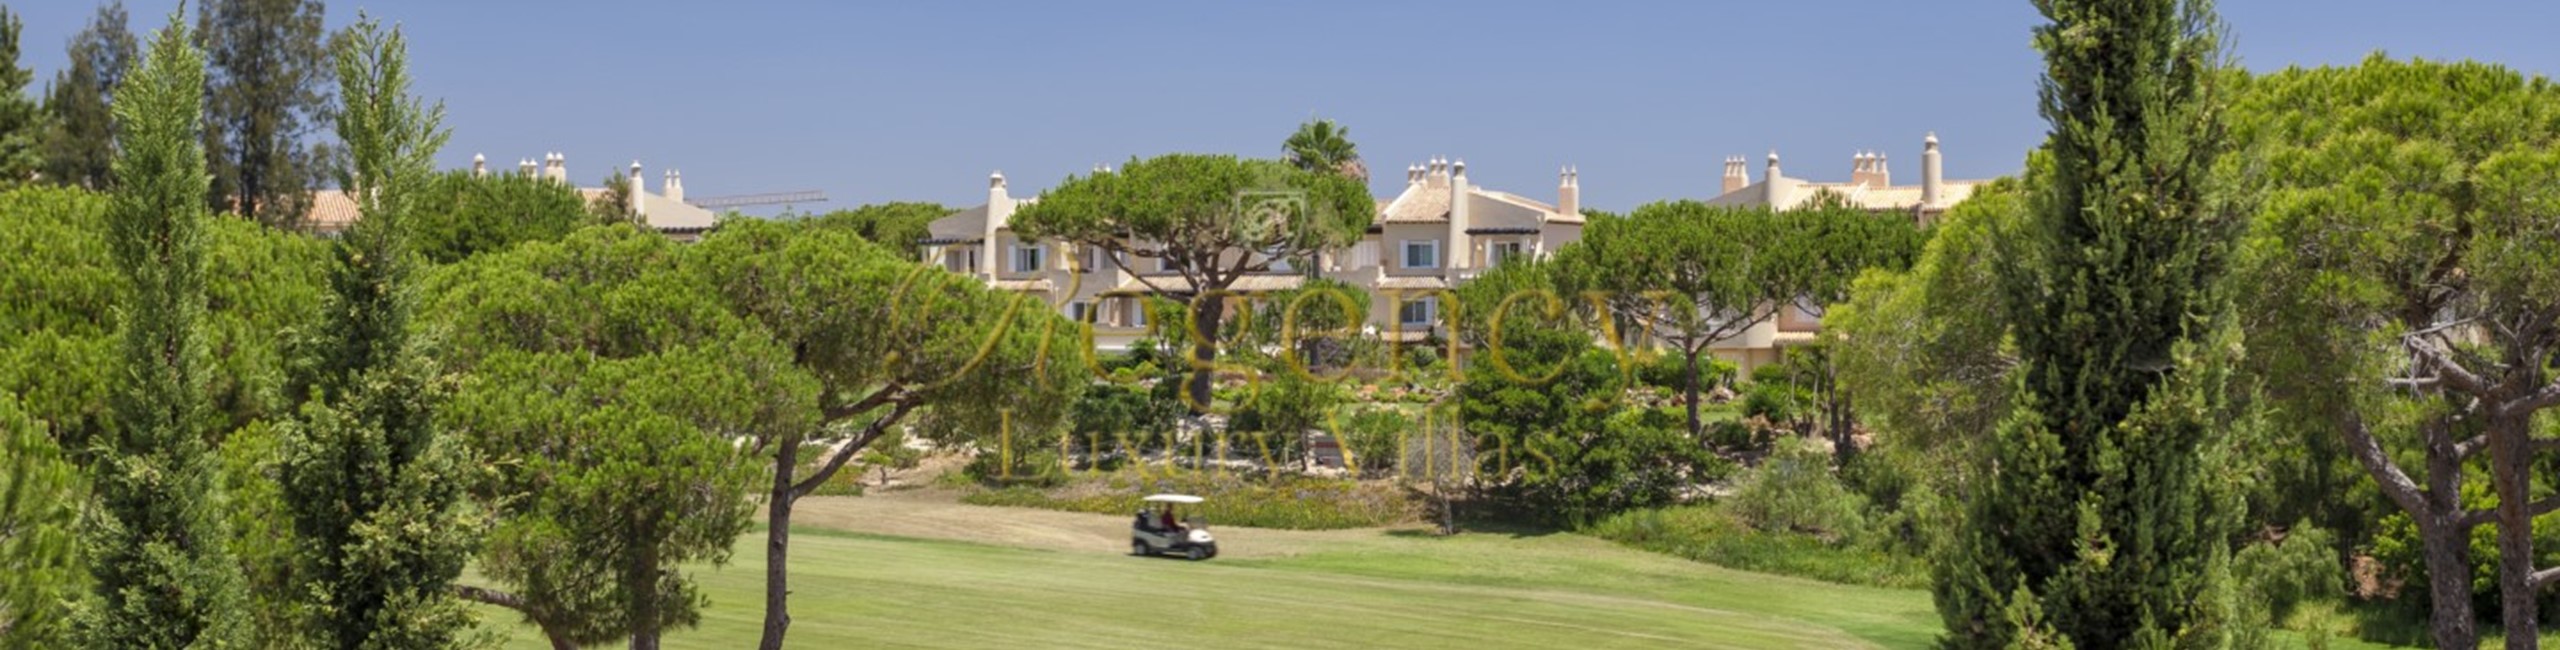 Quinta Do Lago 5 Bed Holiday Villa To Rent With Pool Portugal Regency Luxury Villas 24